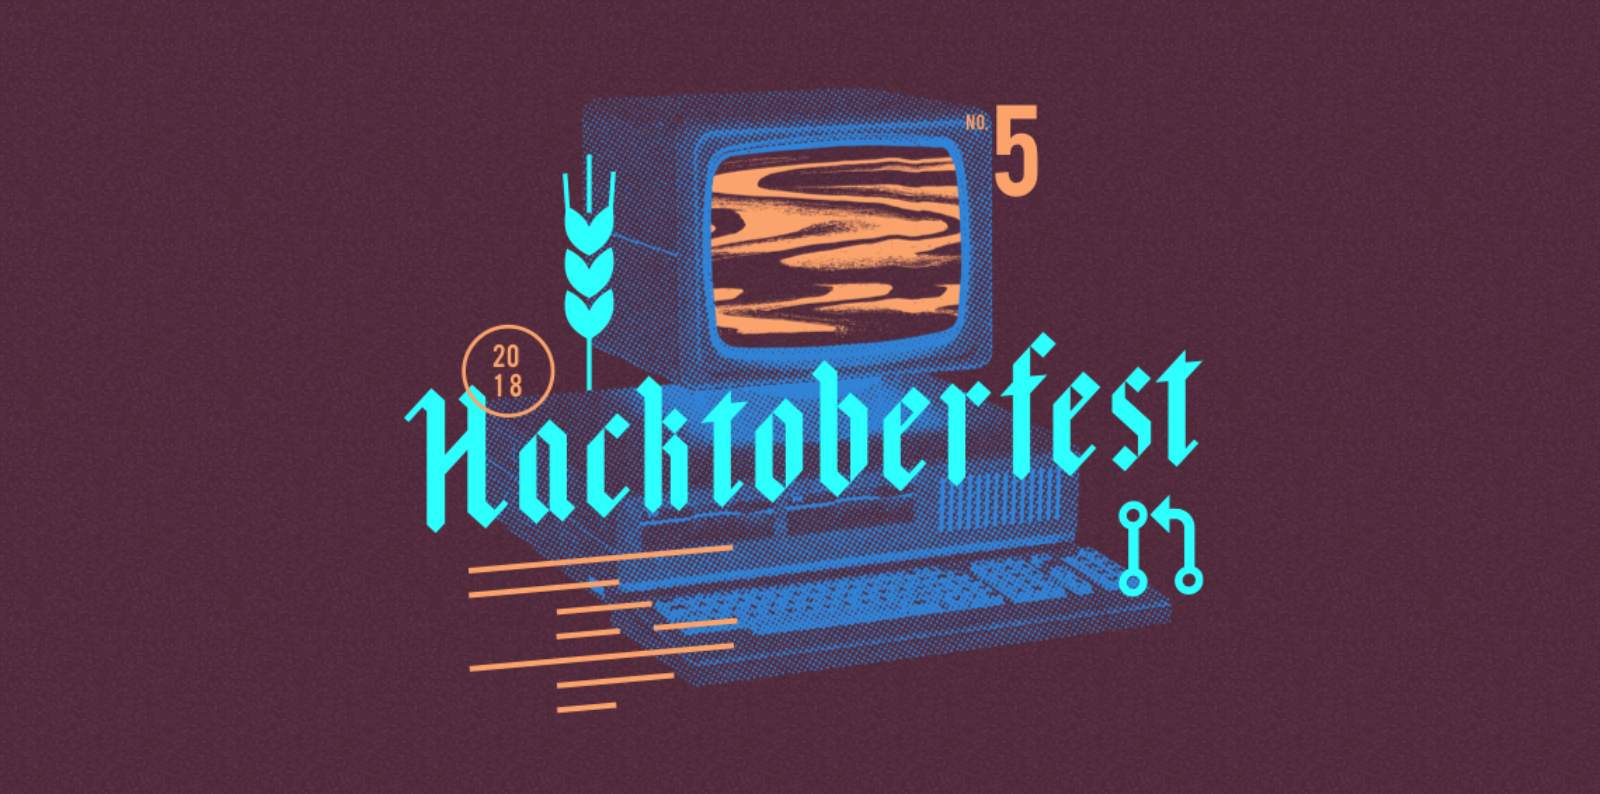 5th Annual Hacktoberfest Kicks Off Today, Updated Rules Require 5 Pull Requests to Earn a T-shirt